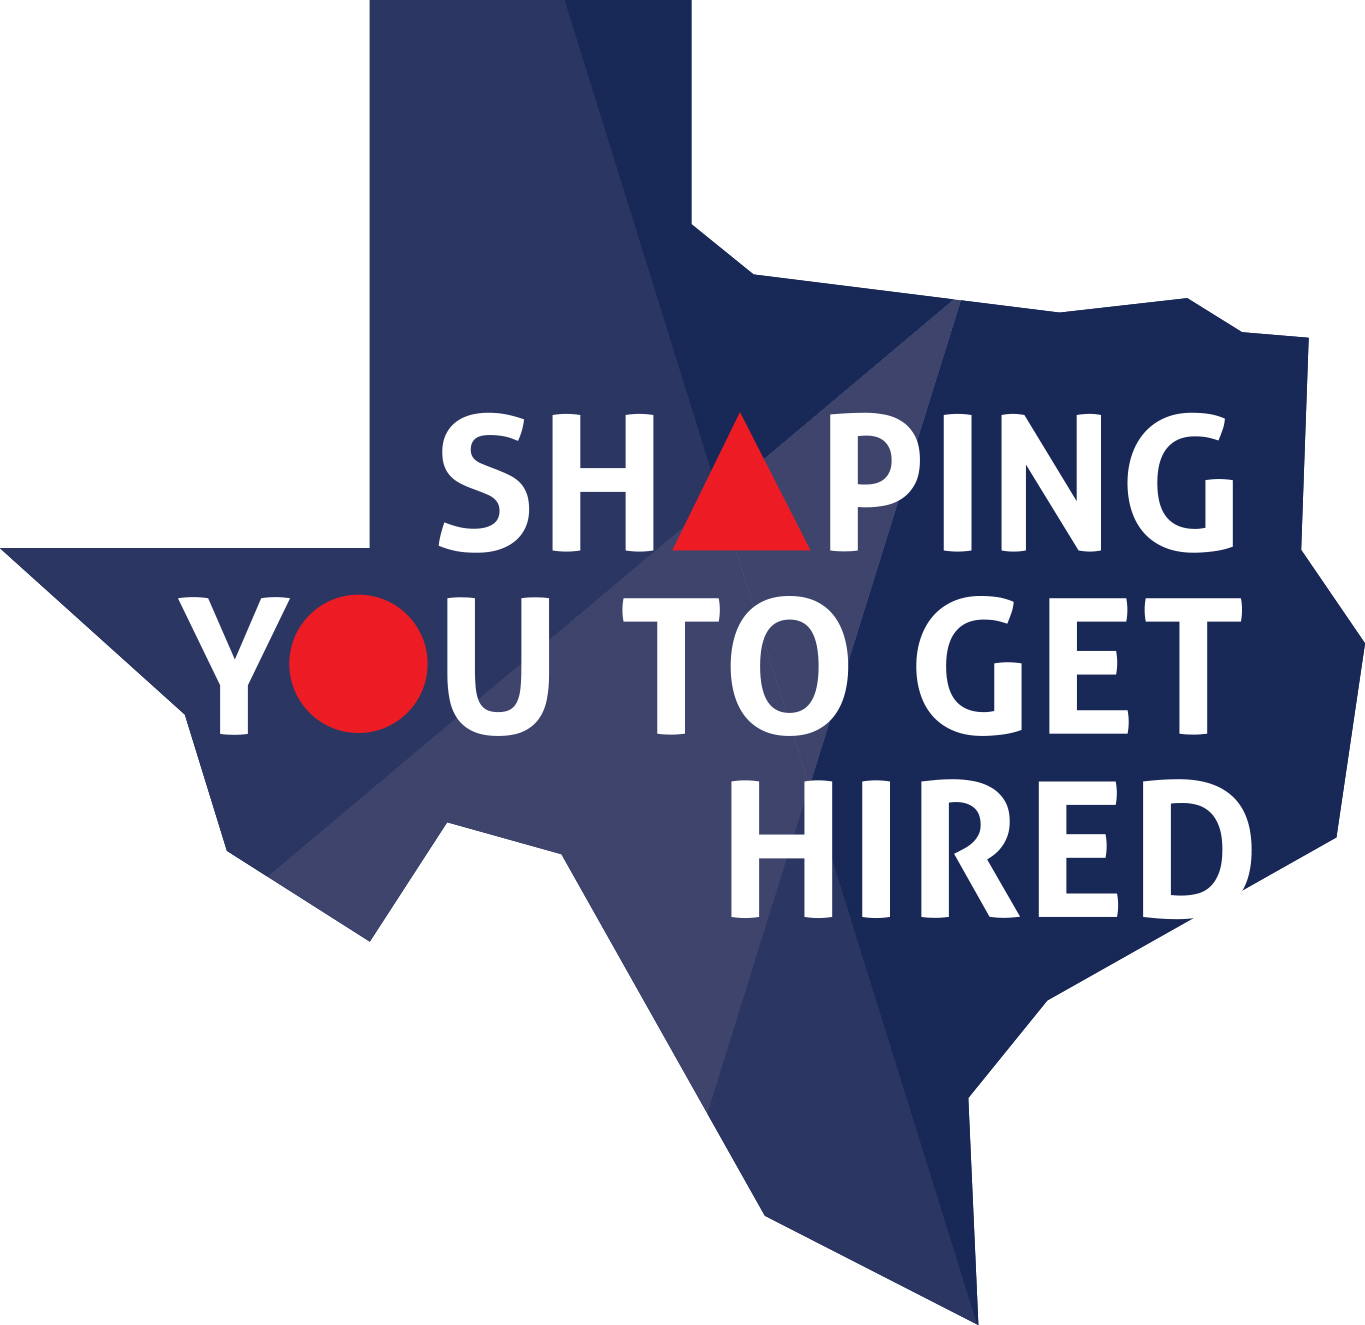 shape of texas in navy with white text shaping you to get hired